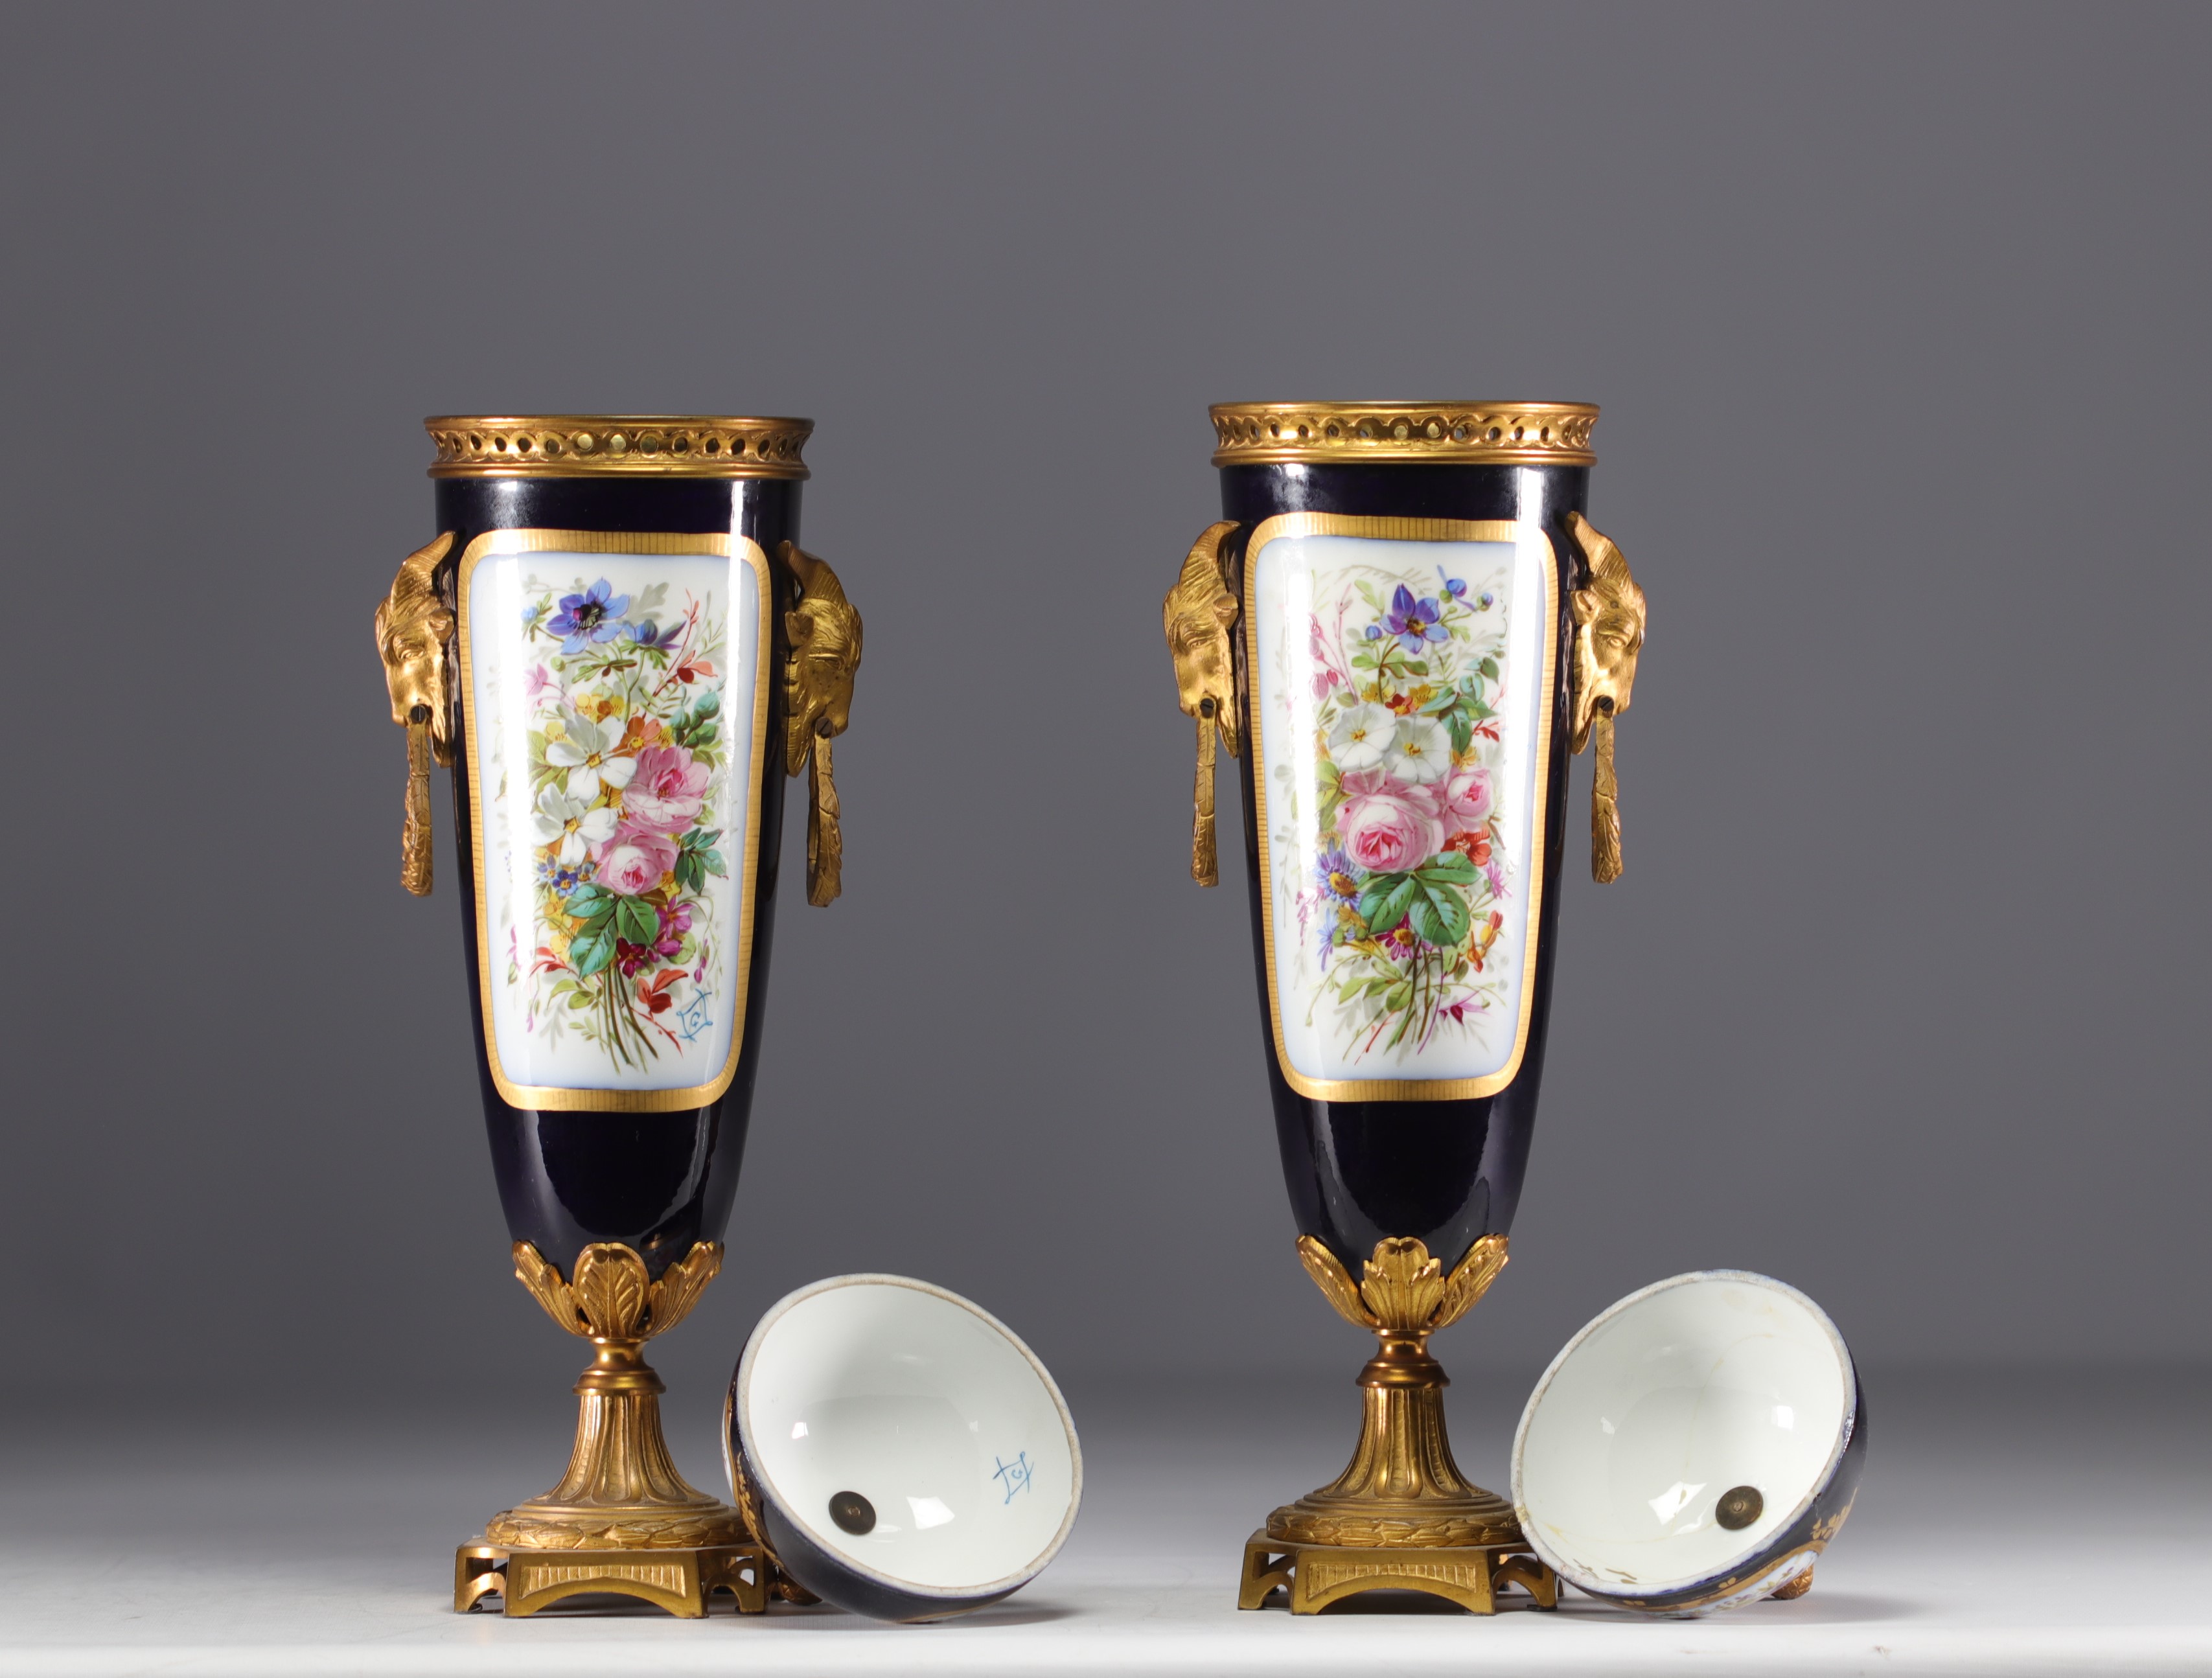 Sevres - Pair of bronze mounted porcelain covered cassolettes "Romantic scenes". - Image 3 of 4